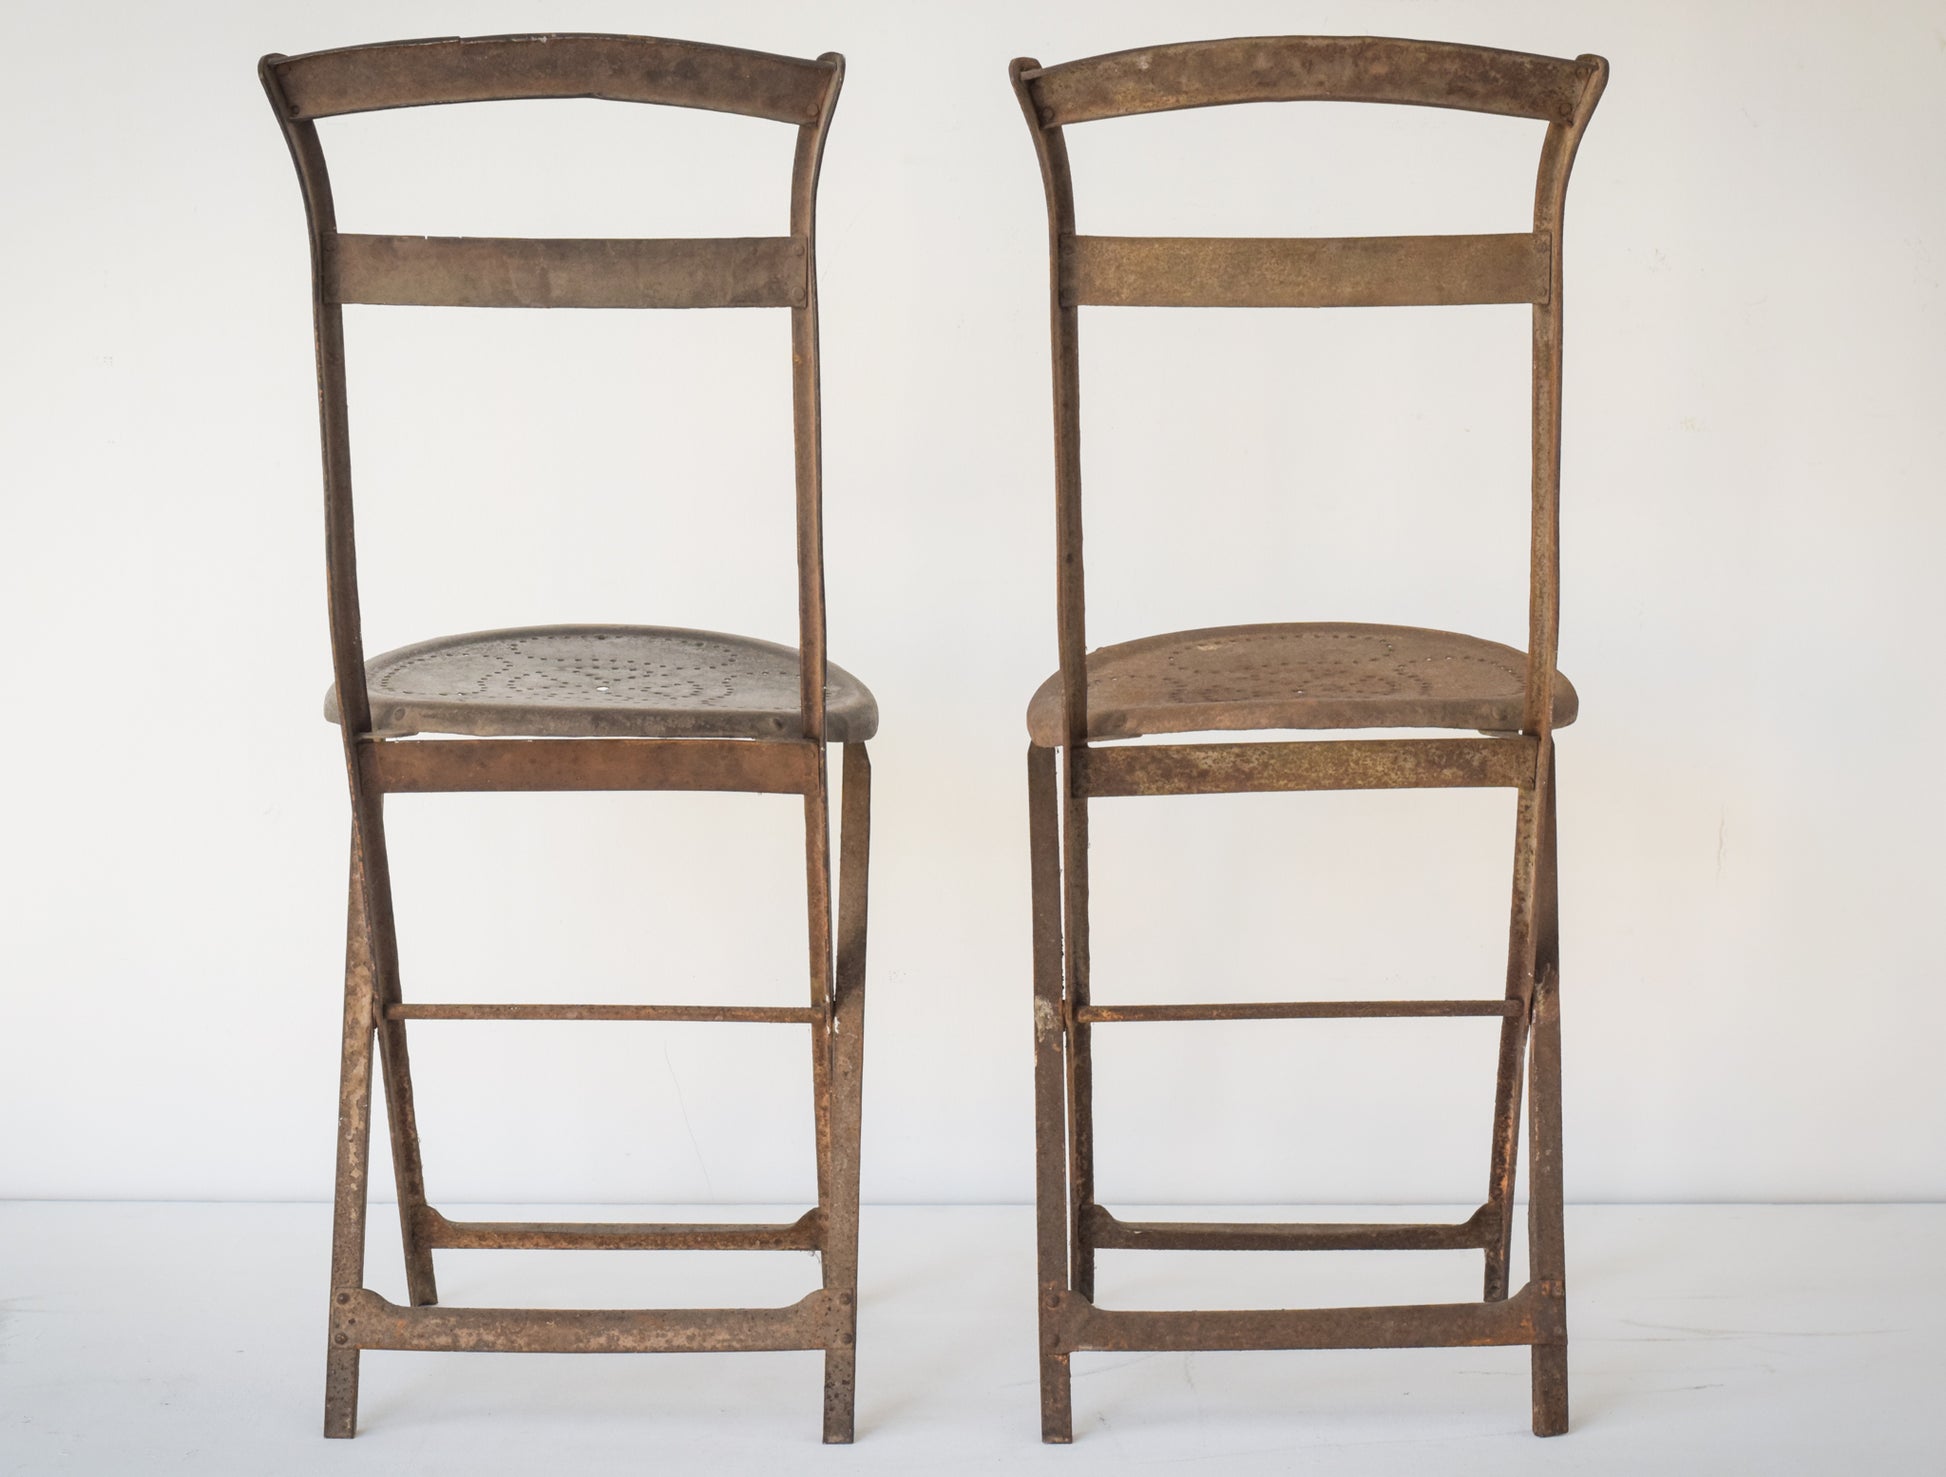 Elegant Antique Pair of French Folding Chairs_Rear